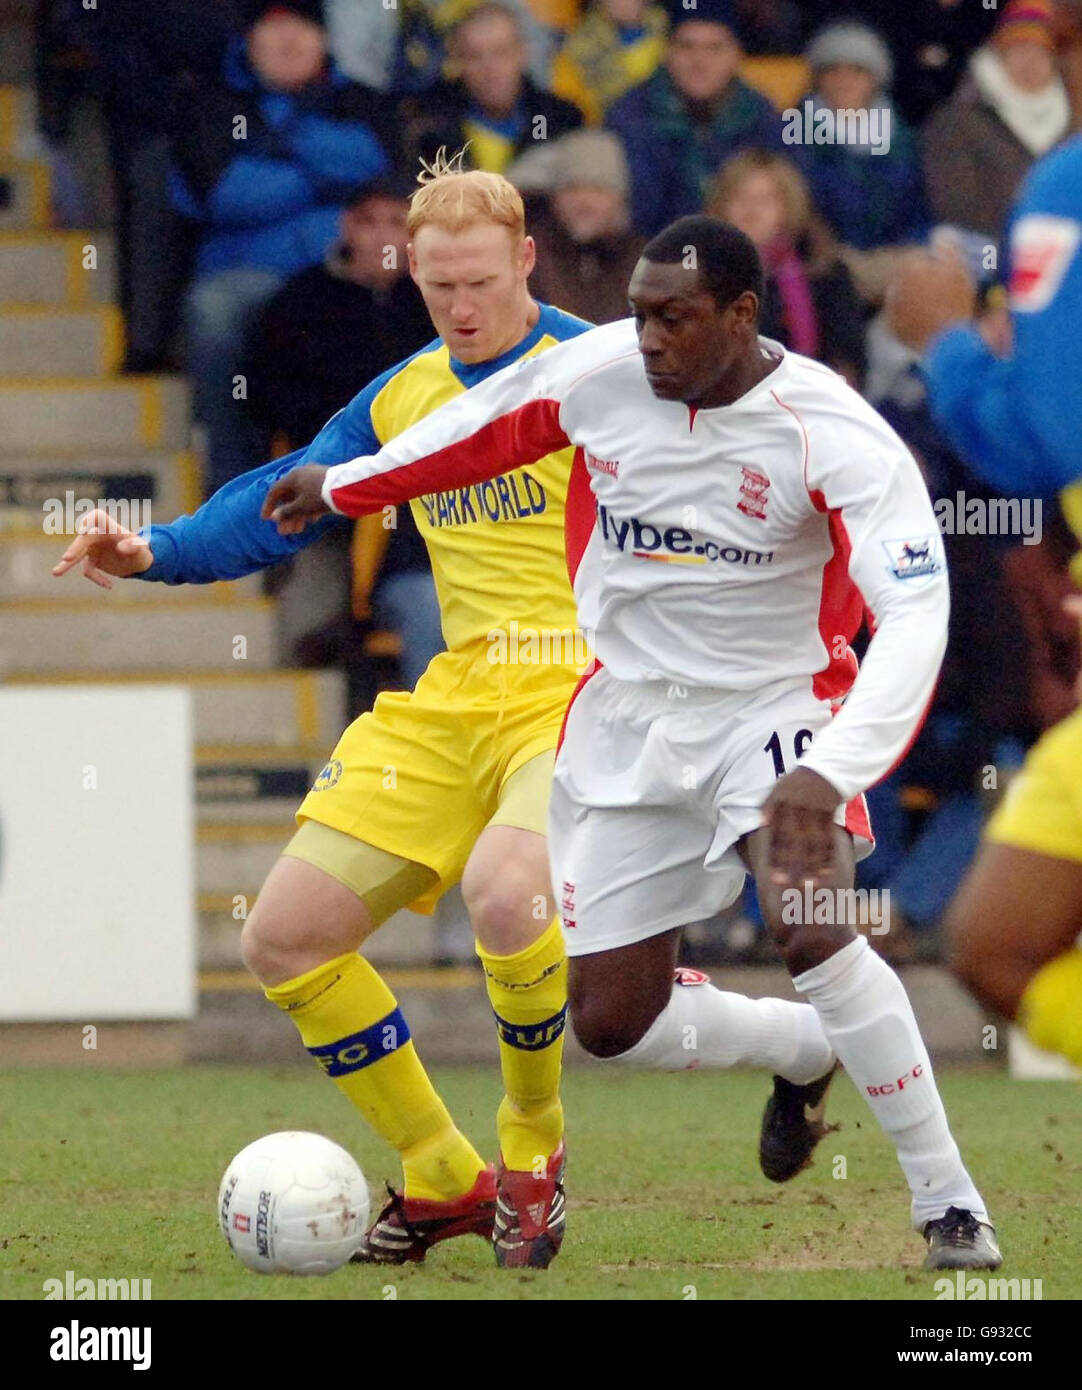 Birminghams City's Emile Heskey (R) battles for the ball with Torquay's James Sharp during the FA Cup Third Round match at Plainmoor, Torquay, Saturday January 7, 2006. PRESS ASSOCIATION Photo. Photo credit should read: Neil Munns/PA. Stock Photo